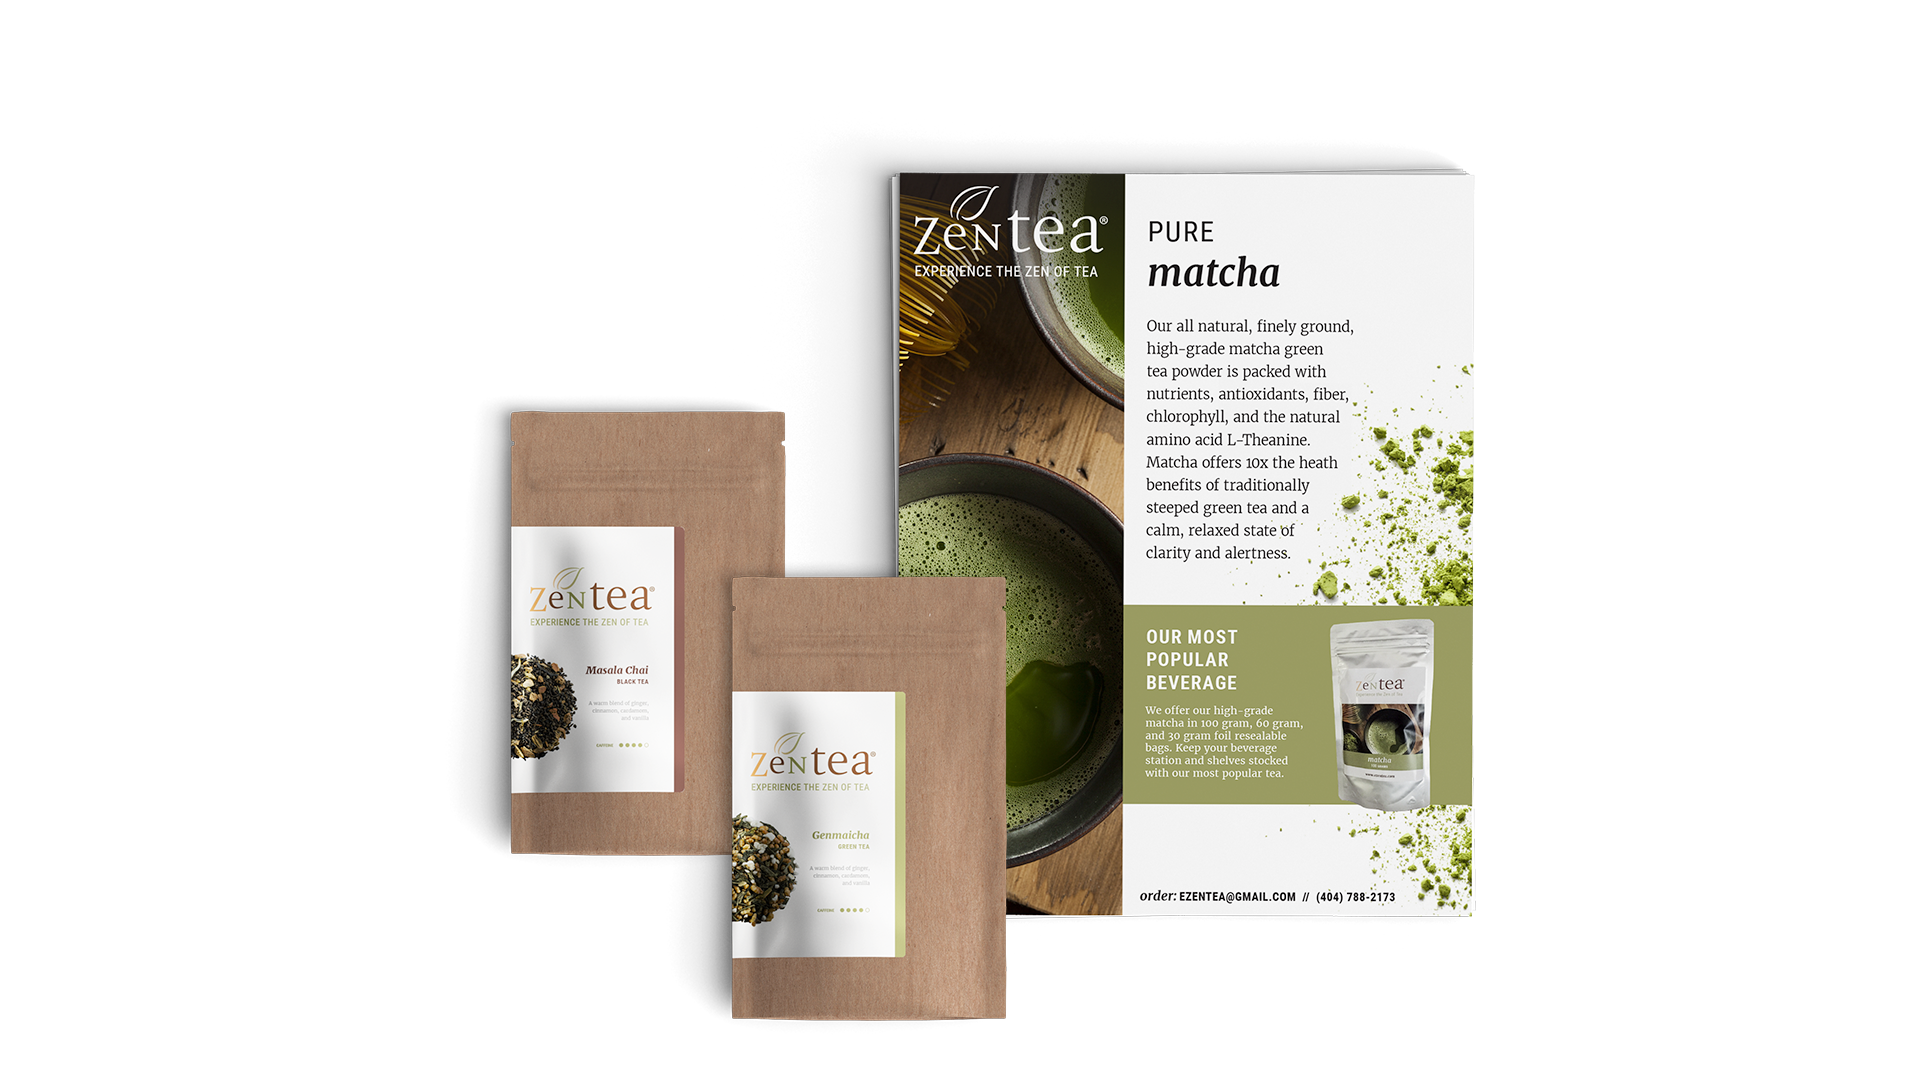 Two packages of tea are resting on top of a stack of flyers promoting Matcha.